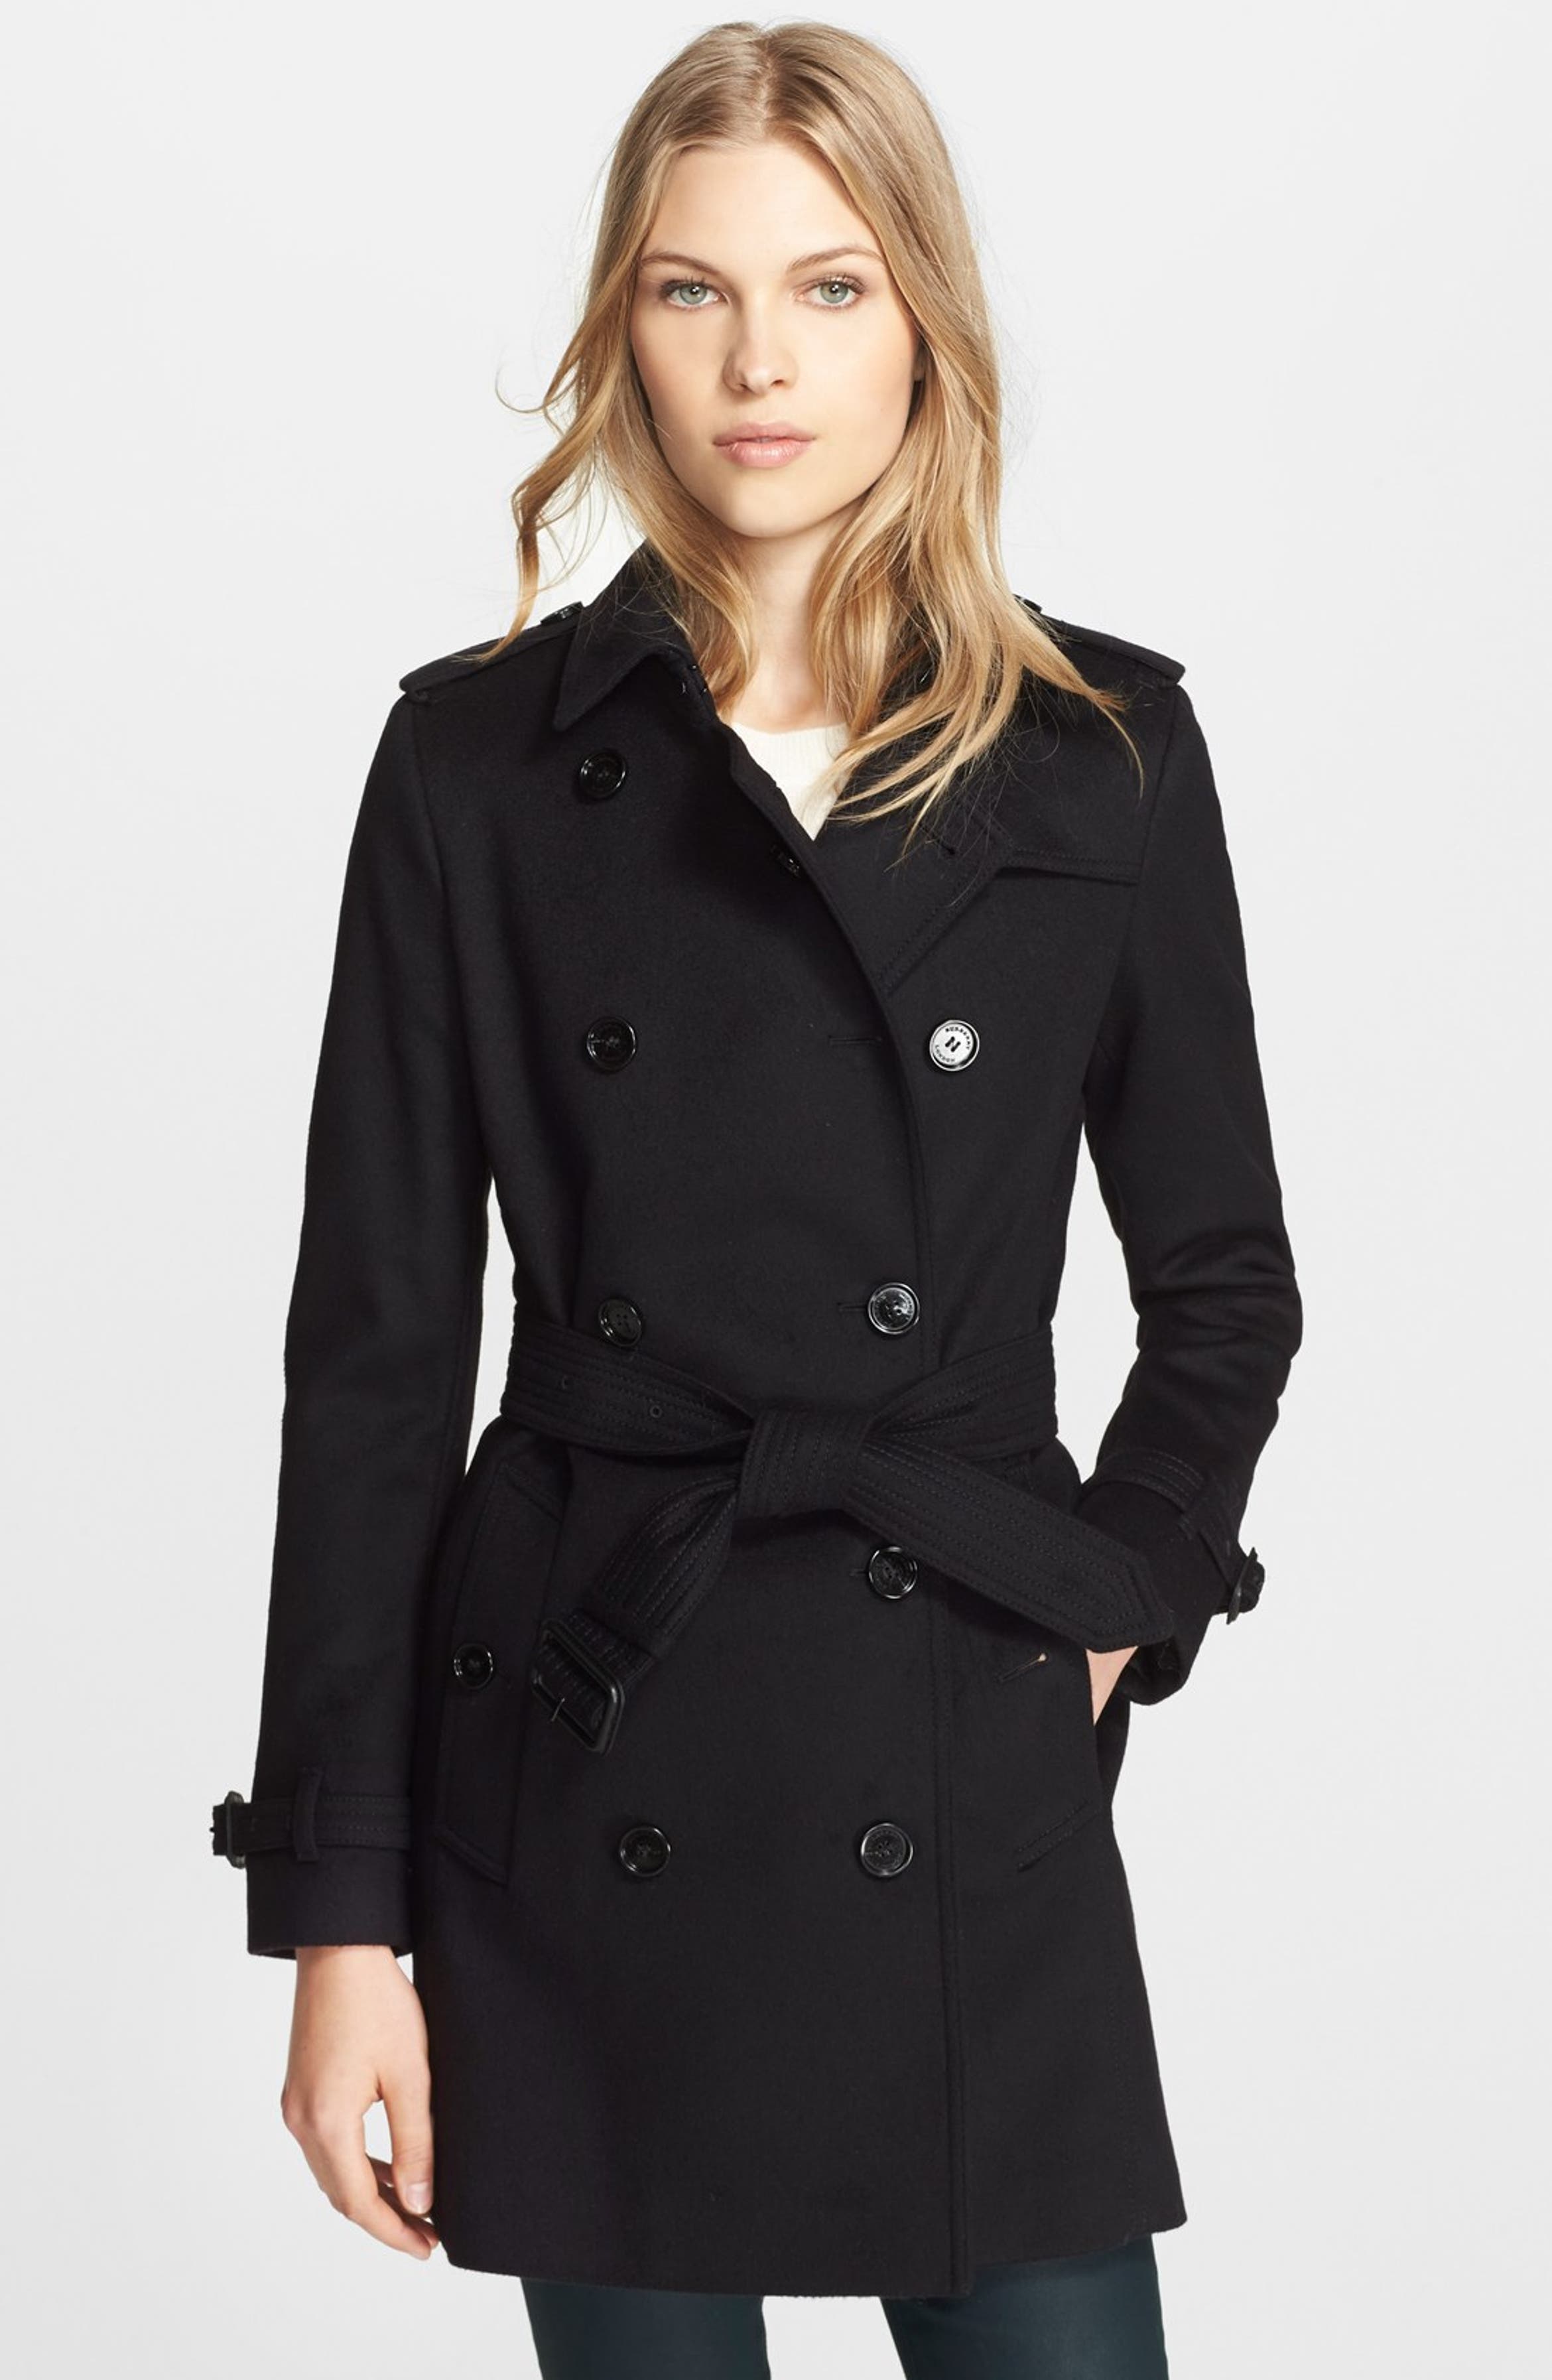 Burberry London 'Kensington' Double Breasted Trench Coat | Nordstrom